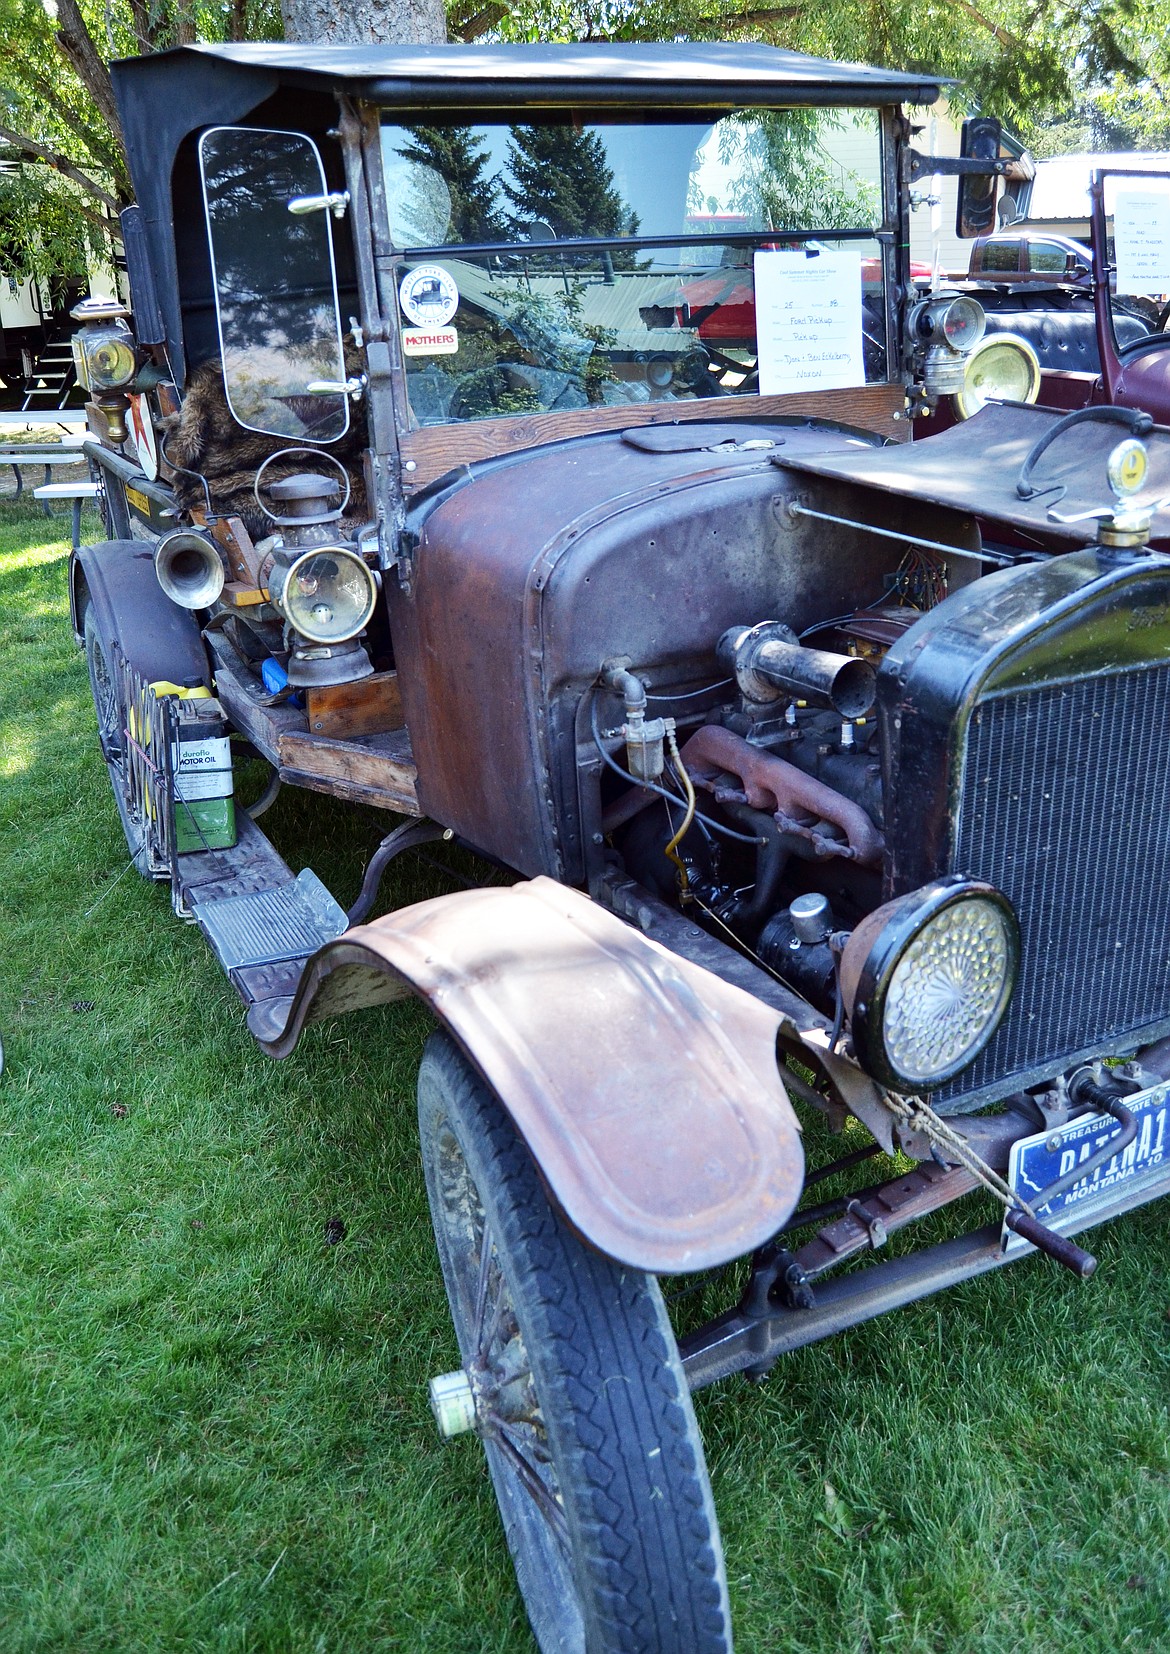 Noxon residents Don and Ben Eckelberry brought their 1925 Ford Pickup to the Cool Summer Nights Car Show in Trout Creek (Erin Jusseaume/Clark Fork Valley Press)